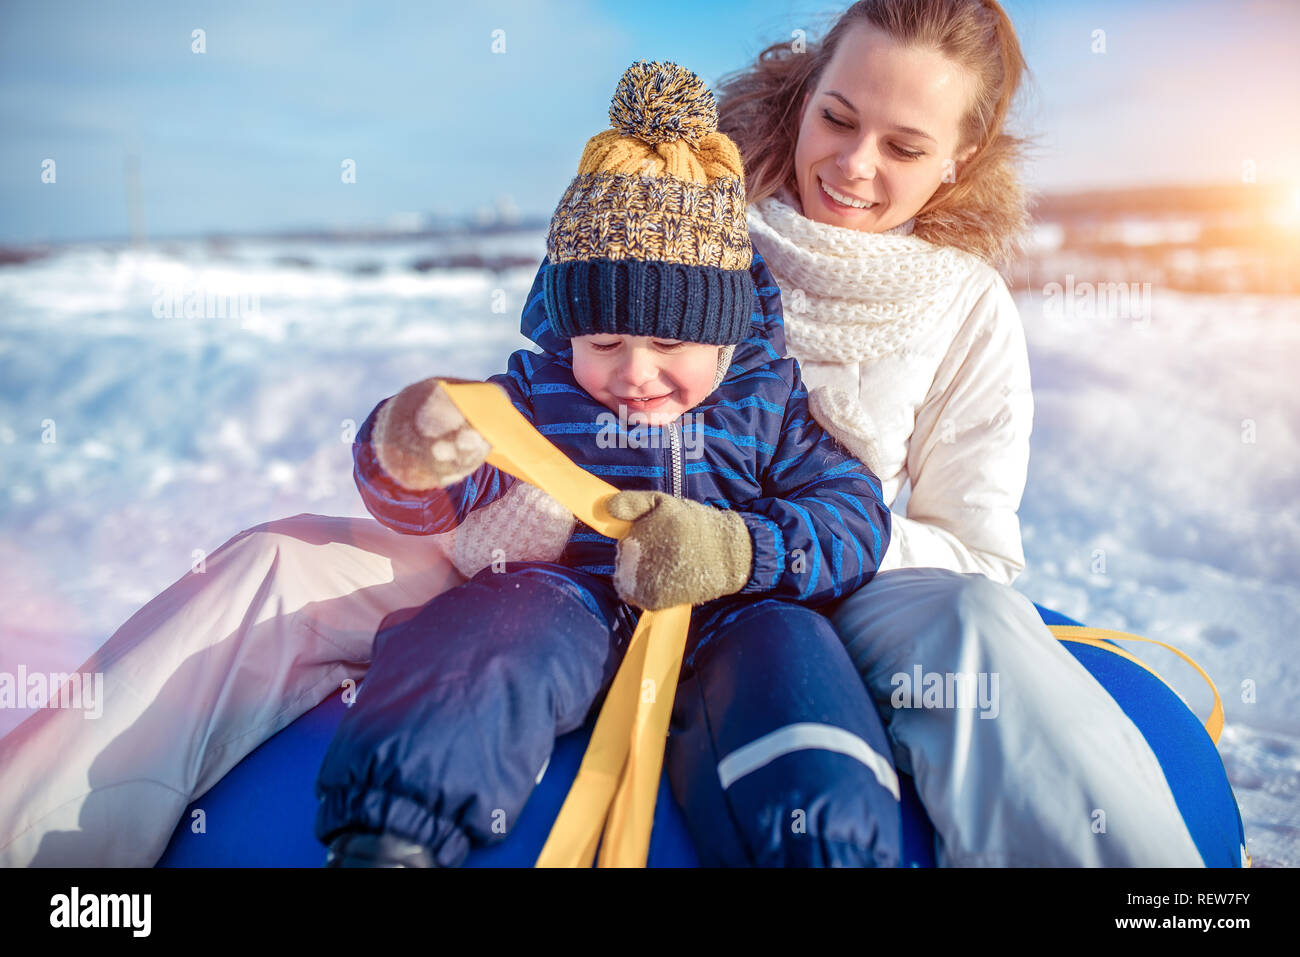 Young mother woman happy smiling, sitting on tubing with her son boy 3-6 years old, playing scrabing in winter. Rest in winter morning in nature. Stock Photo